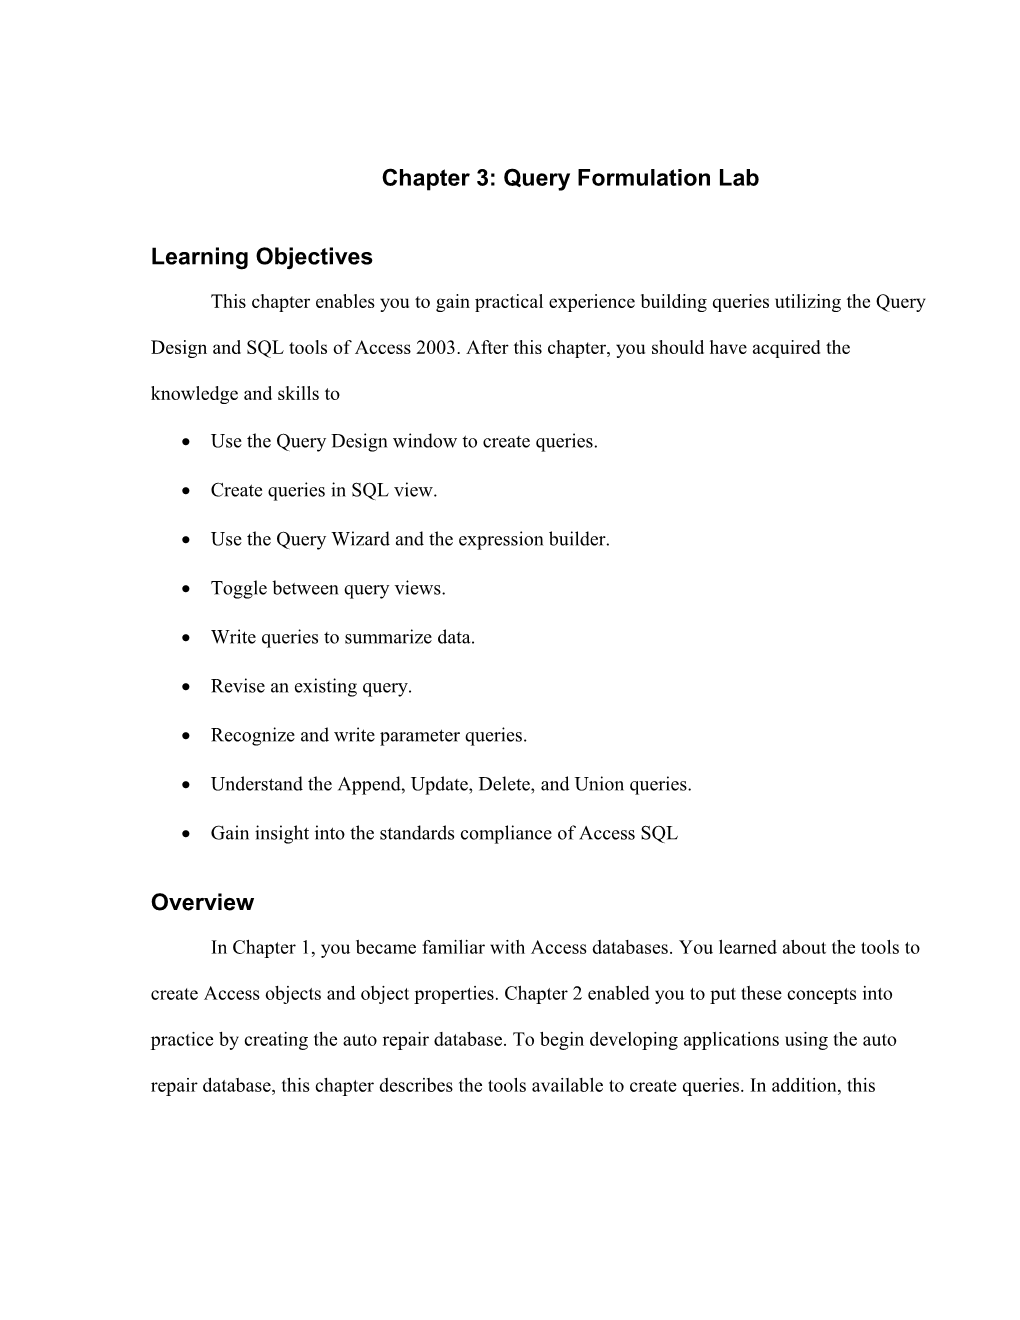 10/03/18 Chapter 3: Query Formulation Lab Page 1